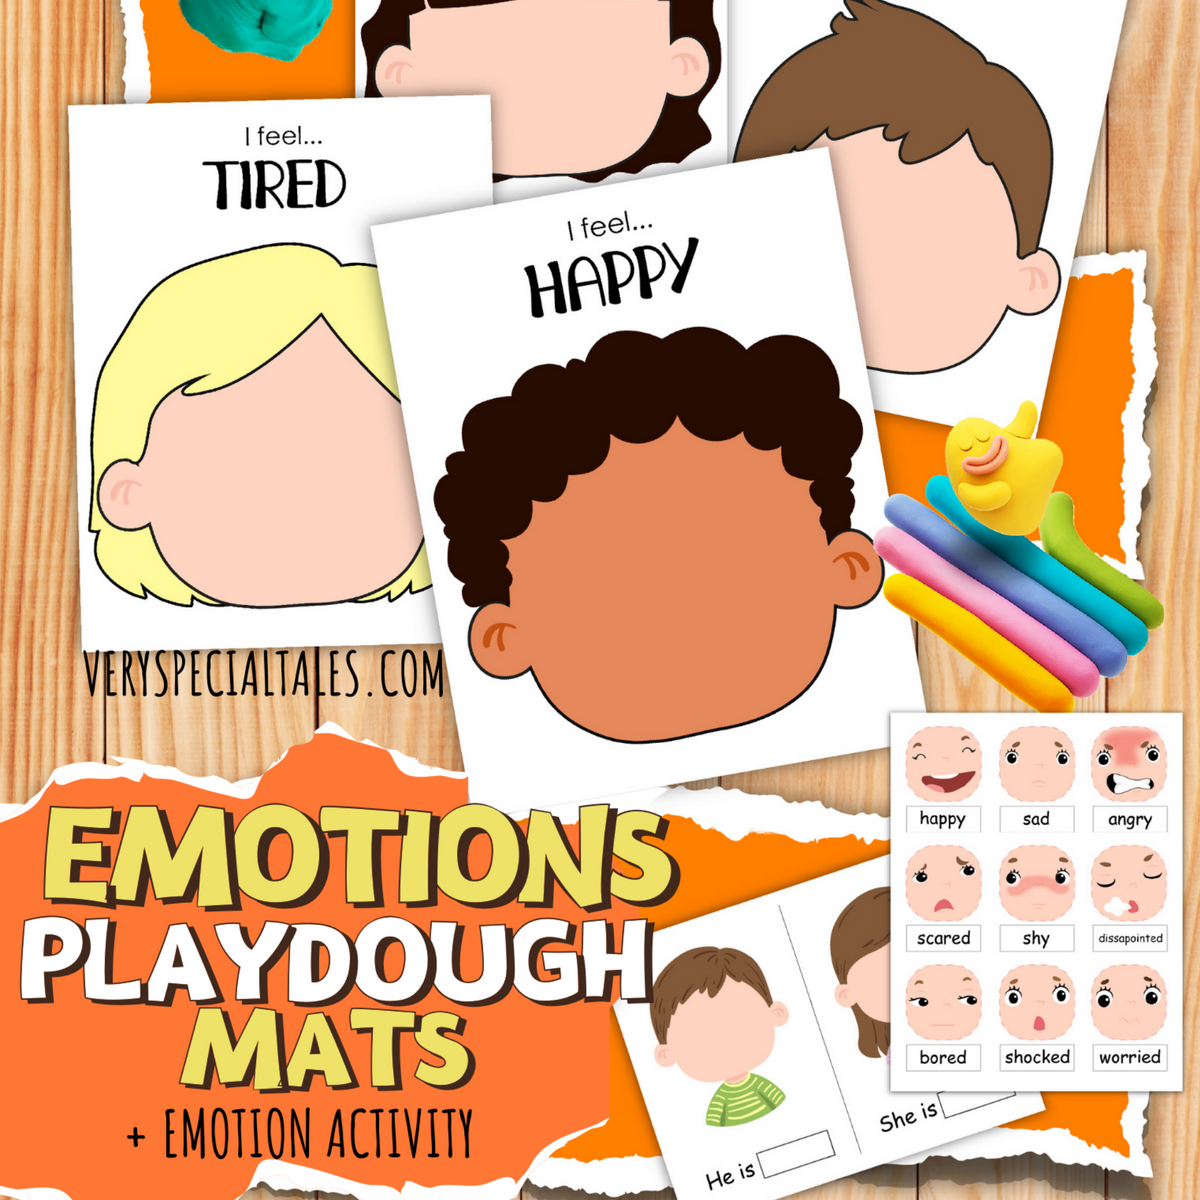 Cards containing playful illustrations of children's heads where play dough faces can be made and placed onto.